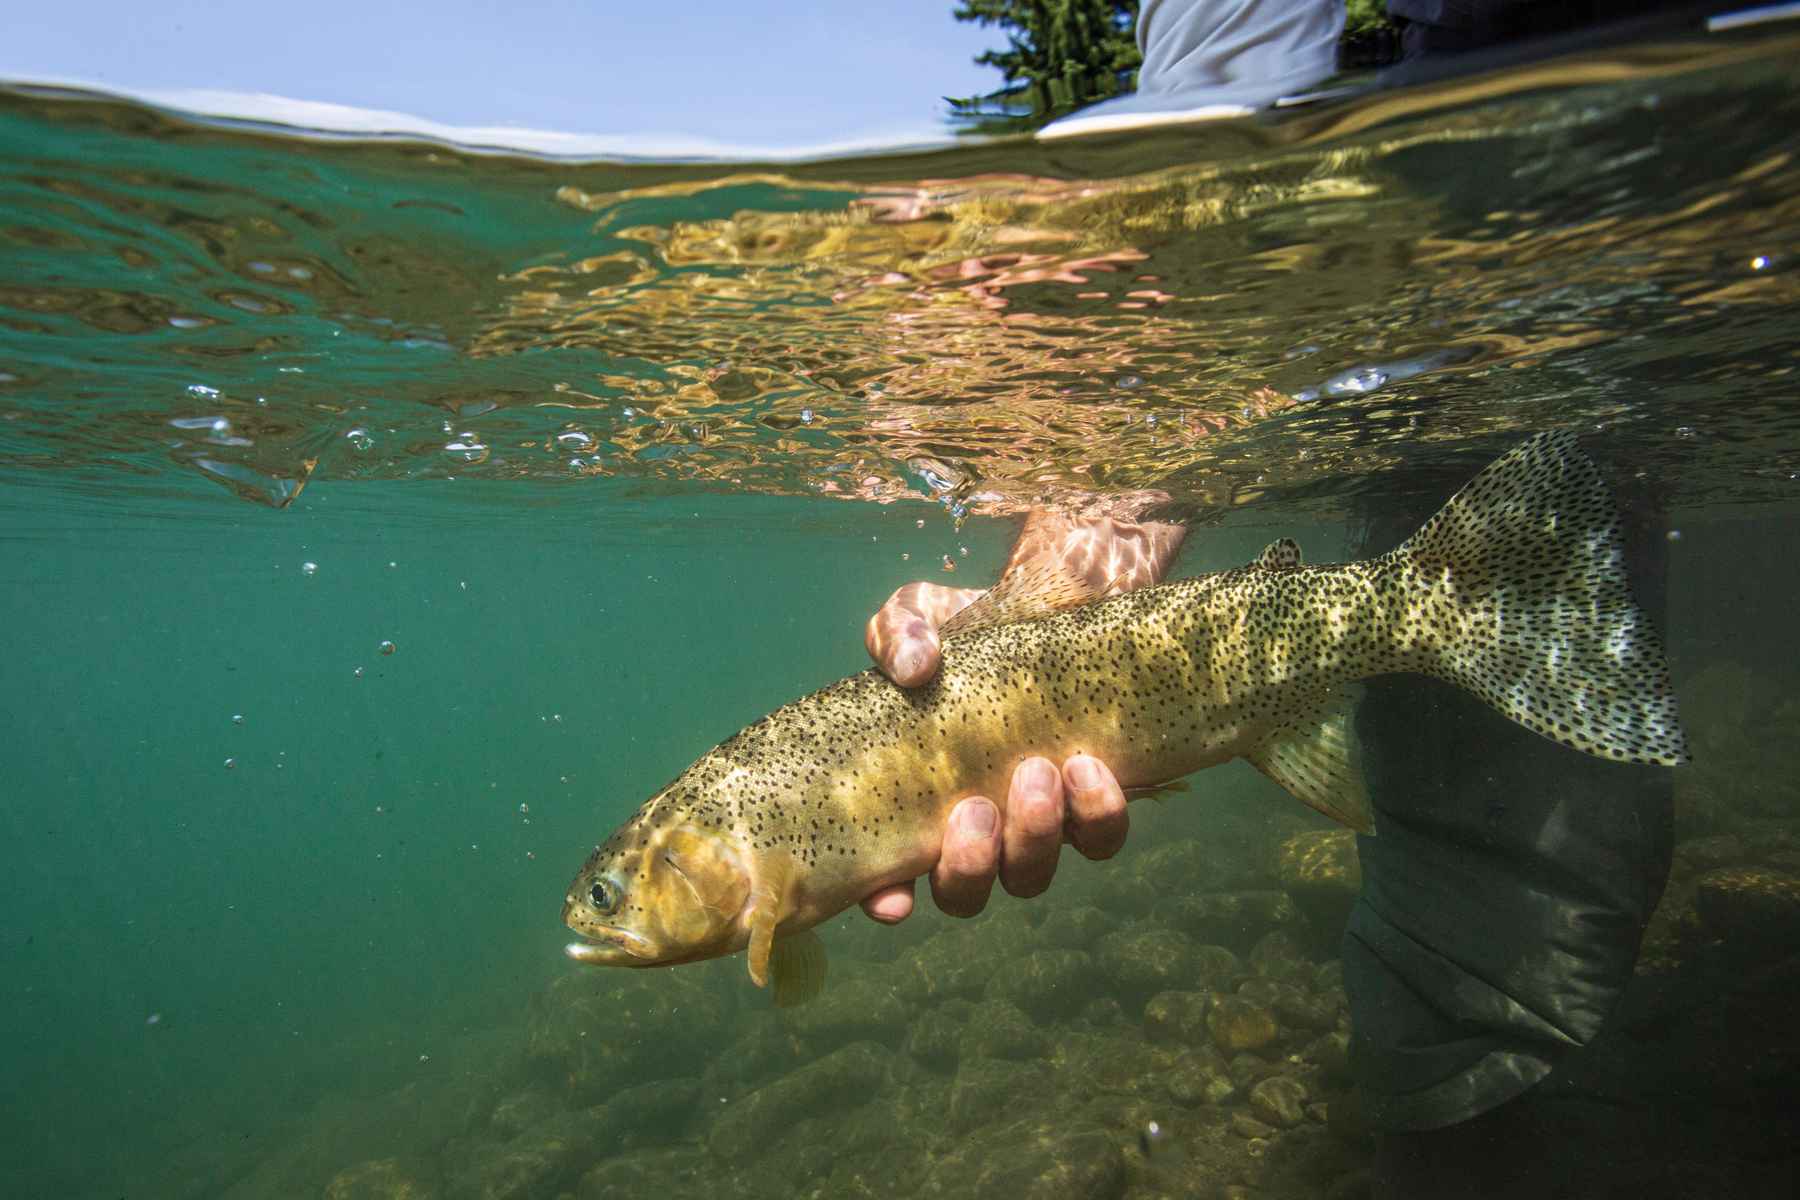 Saving trout from climate change by giving them a new home